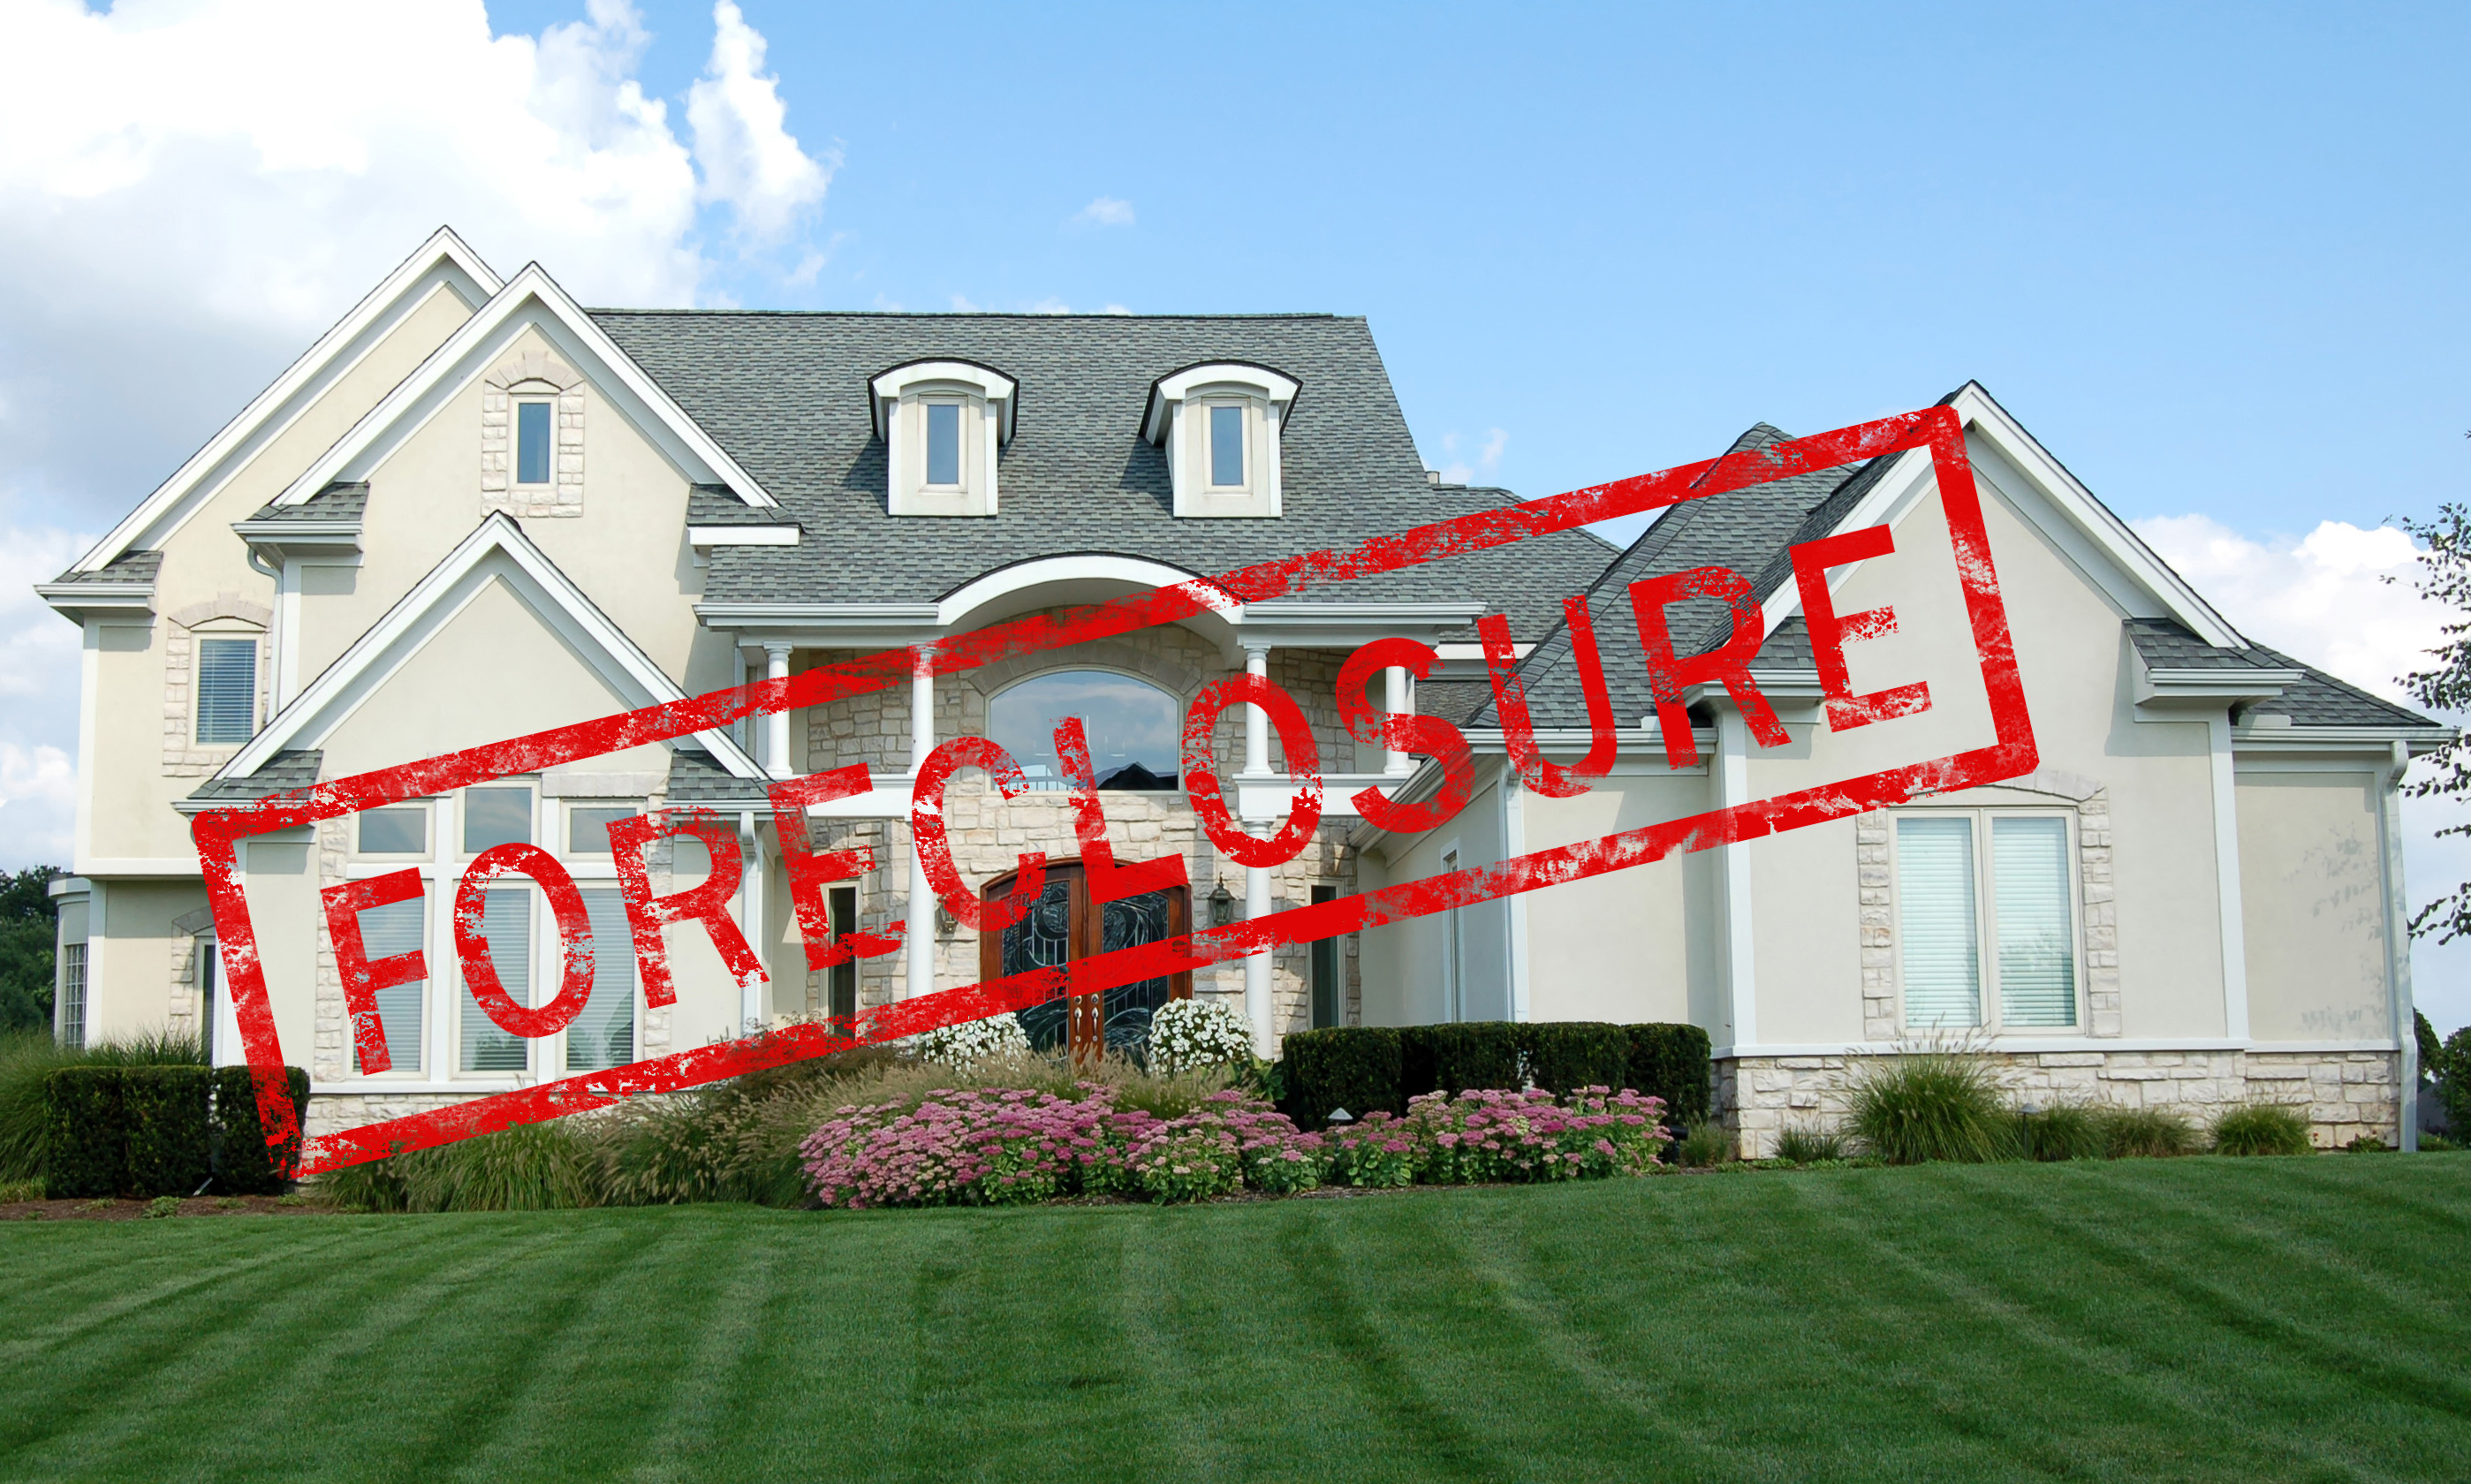 Call MIDWEST VALUATION SERVICE, LLC to discuss valuations regarding Miller foreclosures